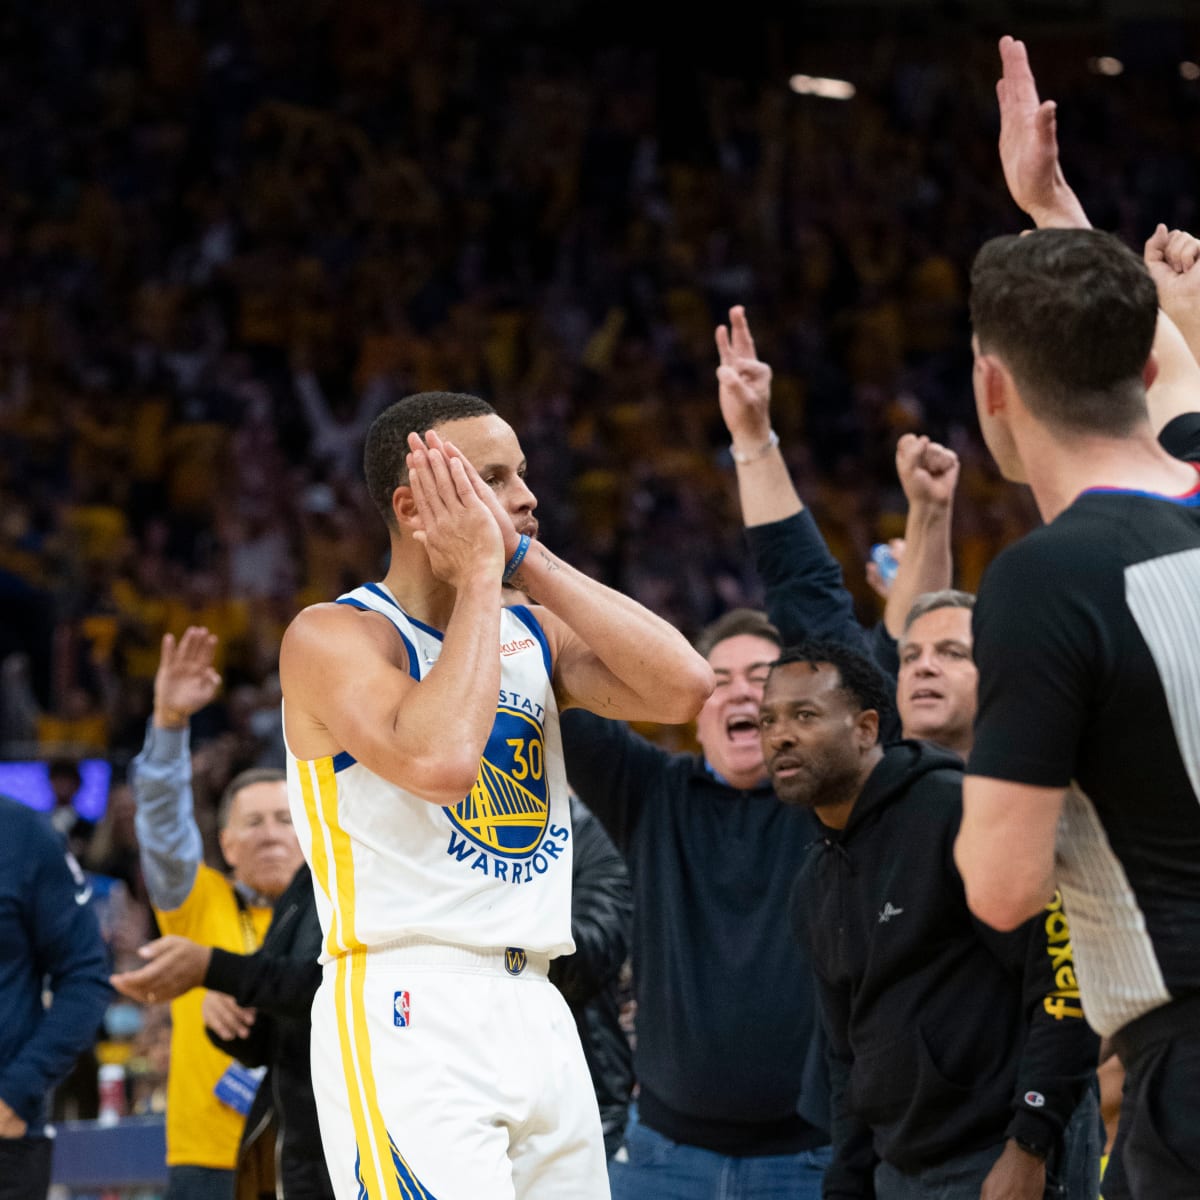 Ultimate Warrior: The Power of the Stephen Curry Jersey - Boardroom